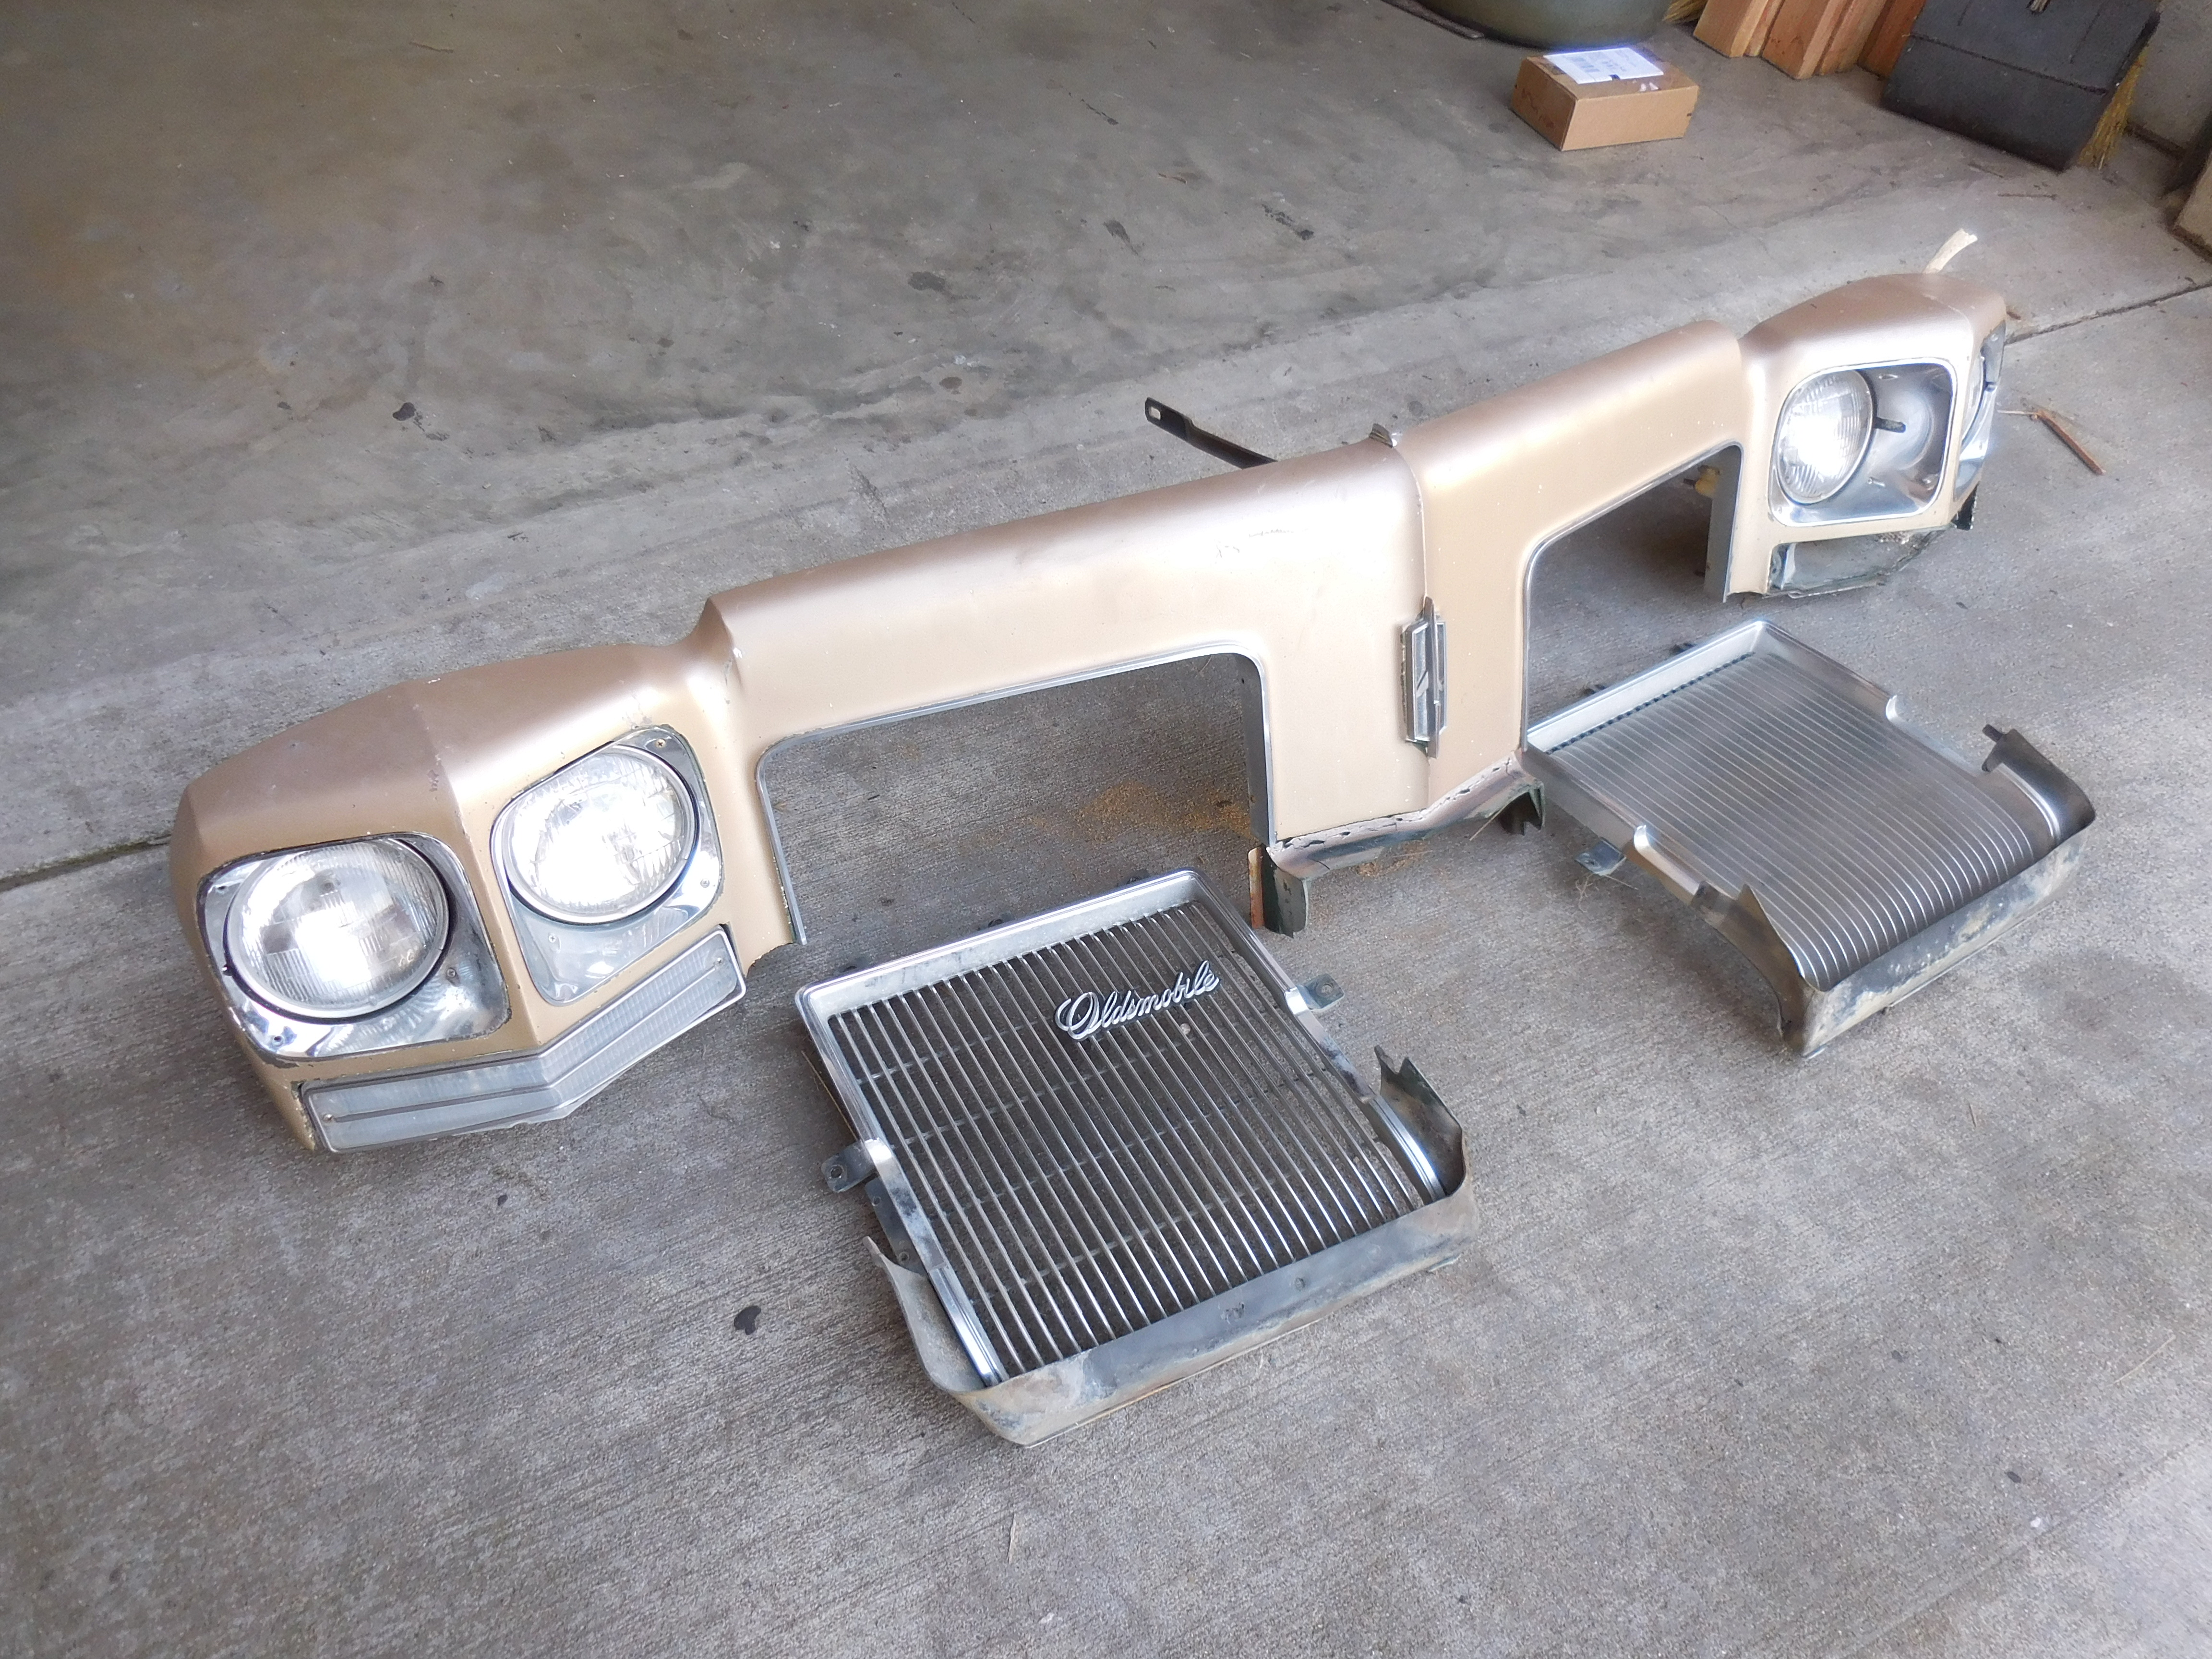 1972, Oldsmobile, 88, Header, Panel, and, Grills,grill,grille,